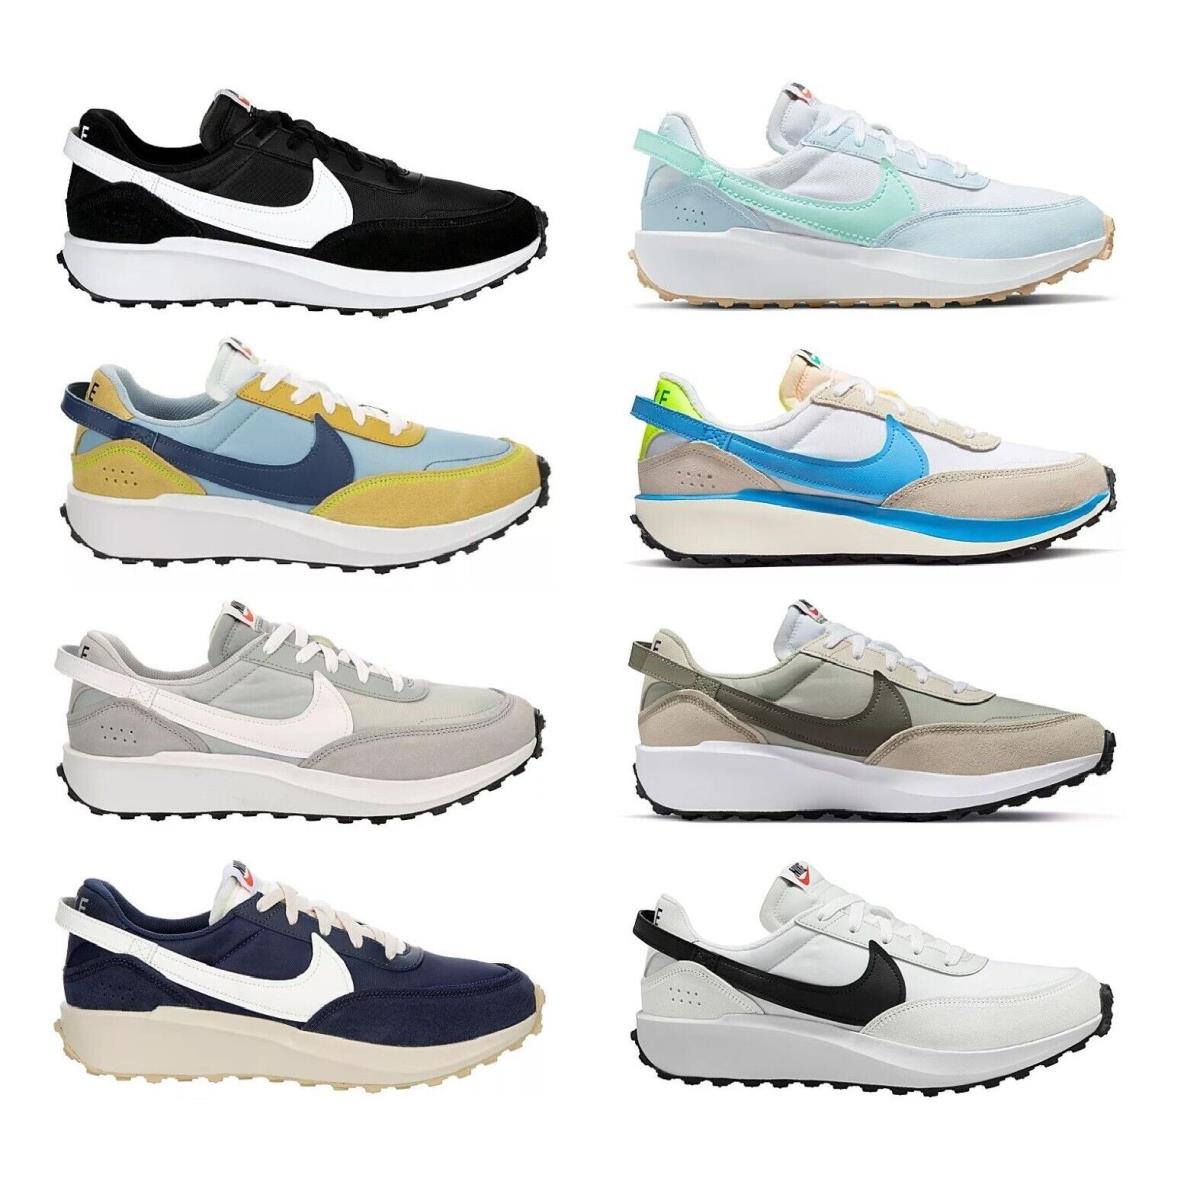 Nike Waffle Debut Retro Men`s Suede Athletic Running Gym Low Top Shoes Sneaker